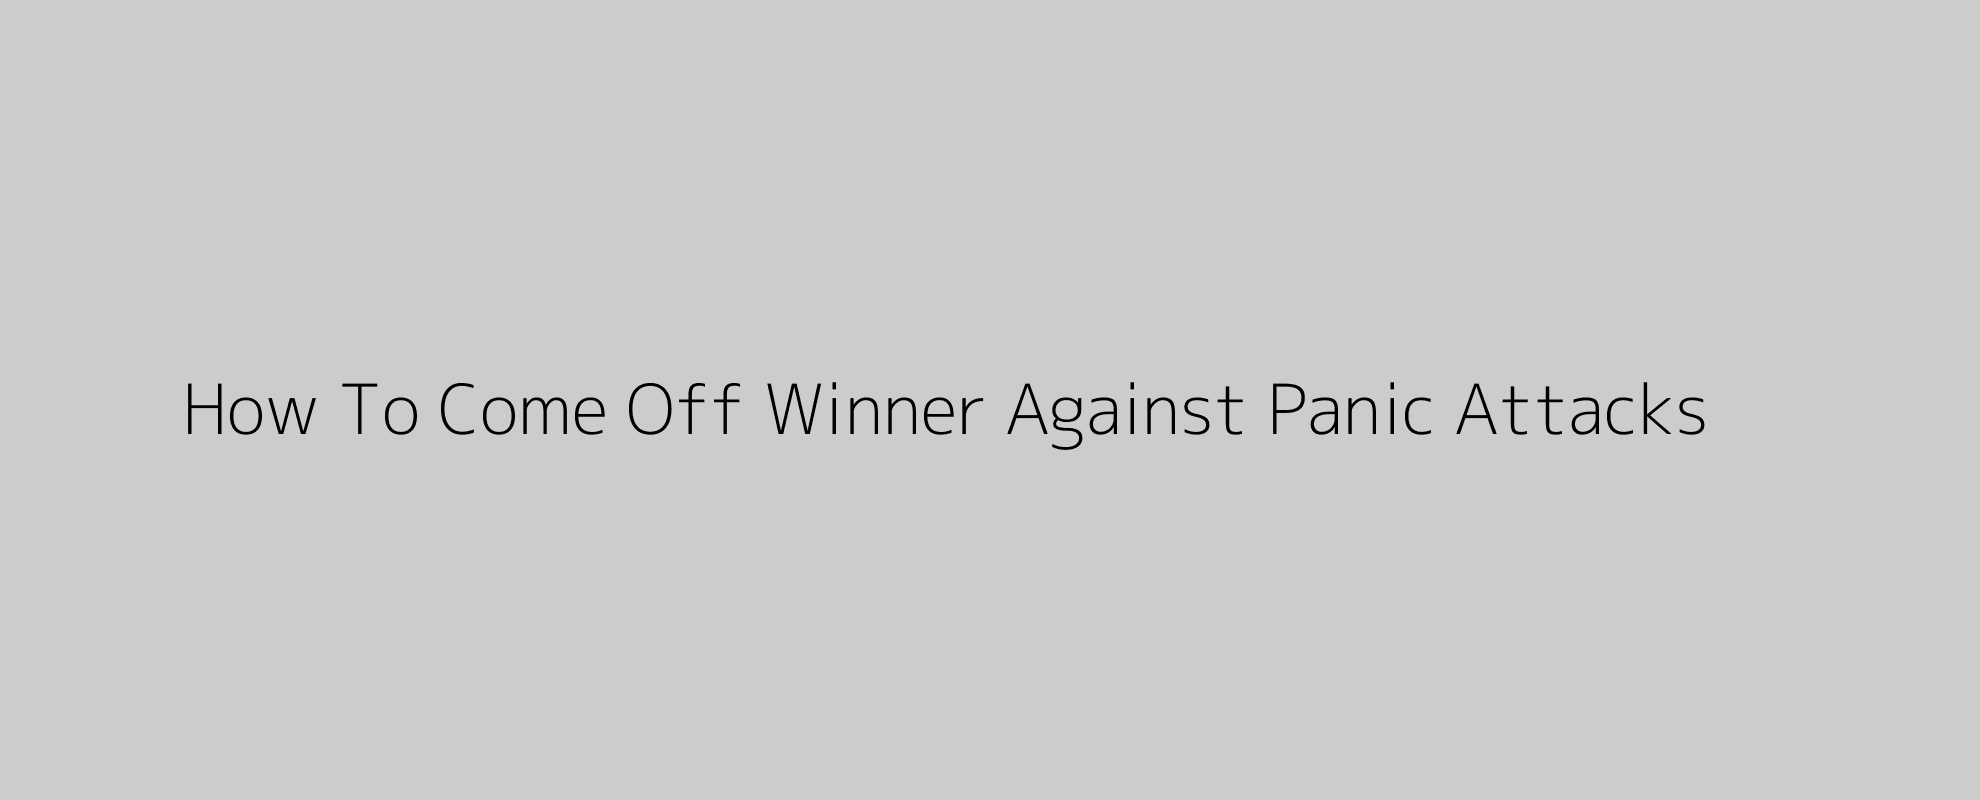 How To Come Off Winner Against Panic Attacks